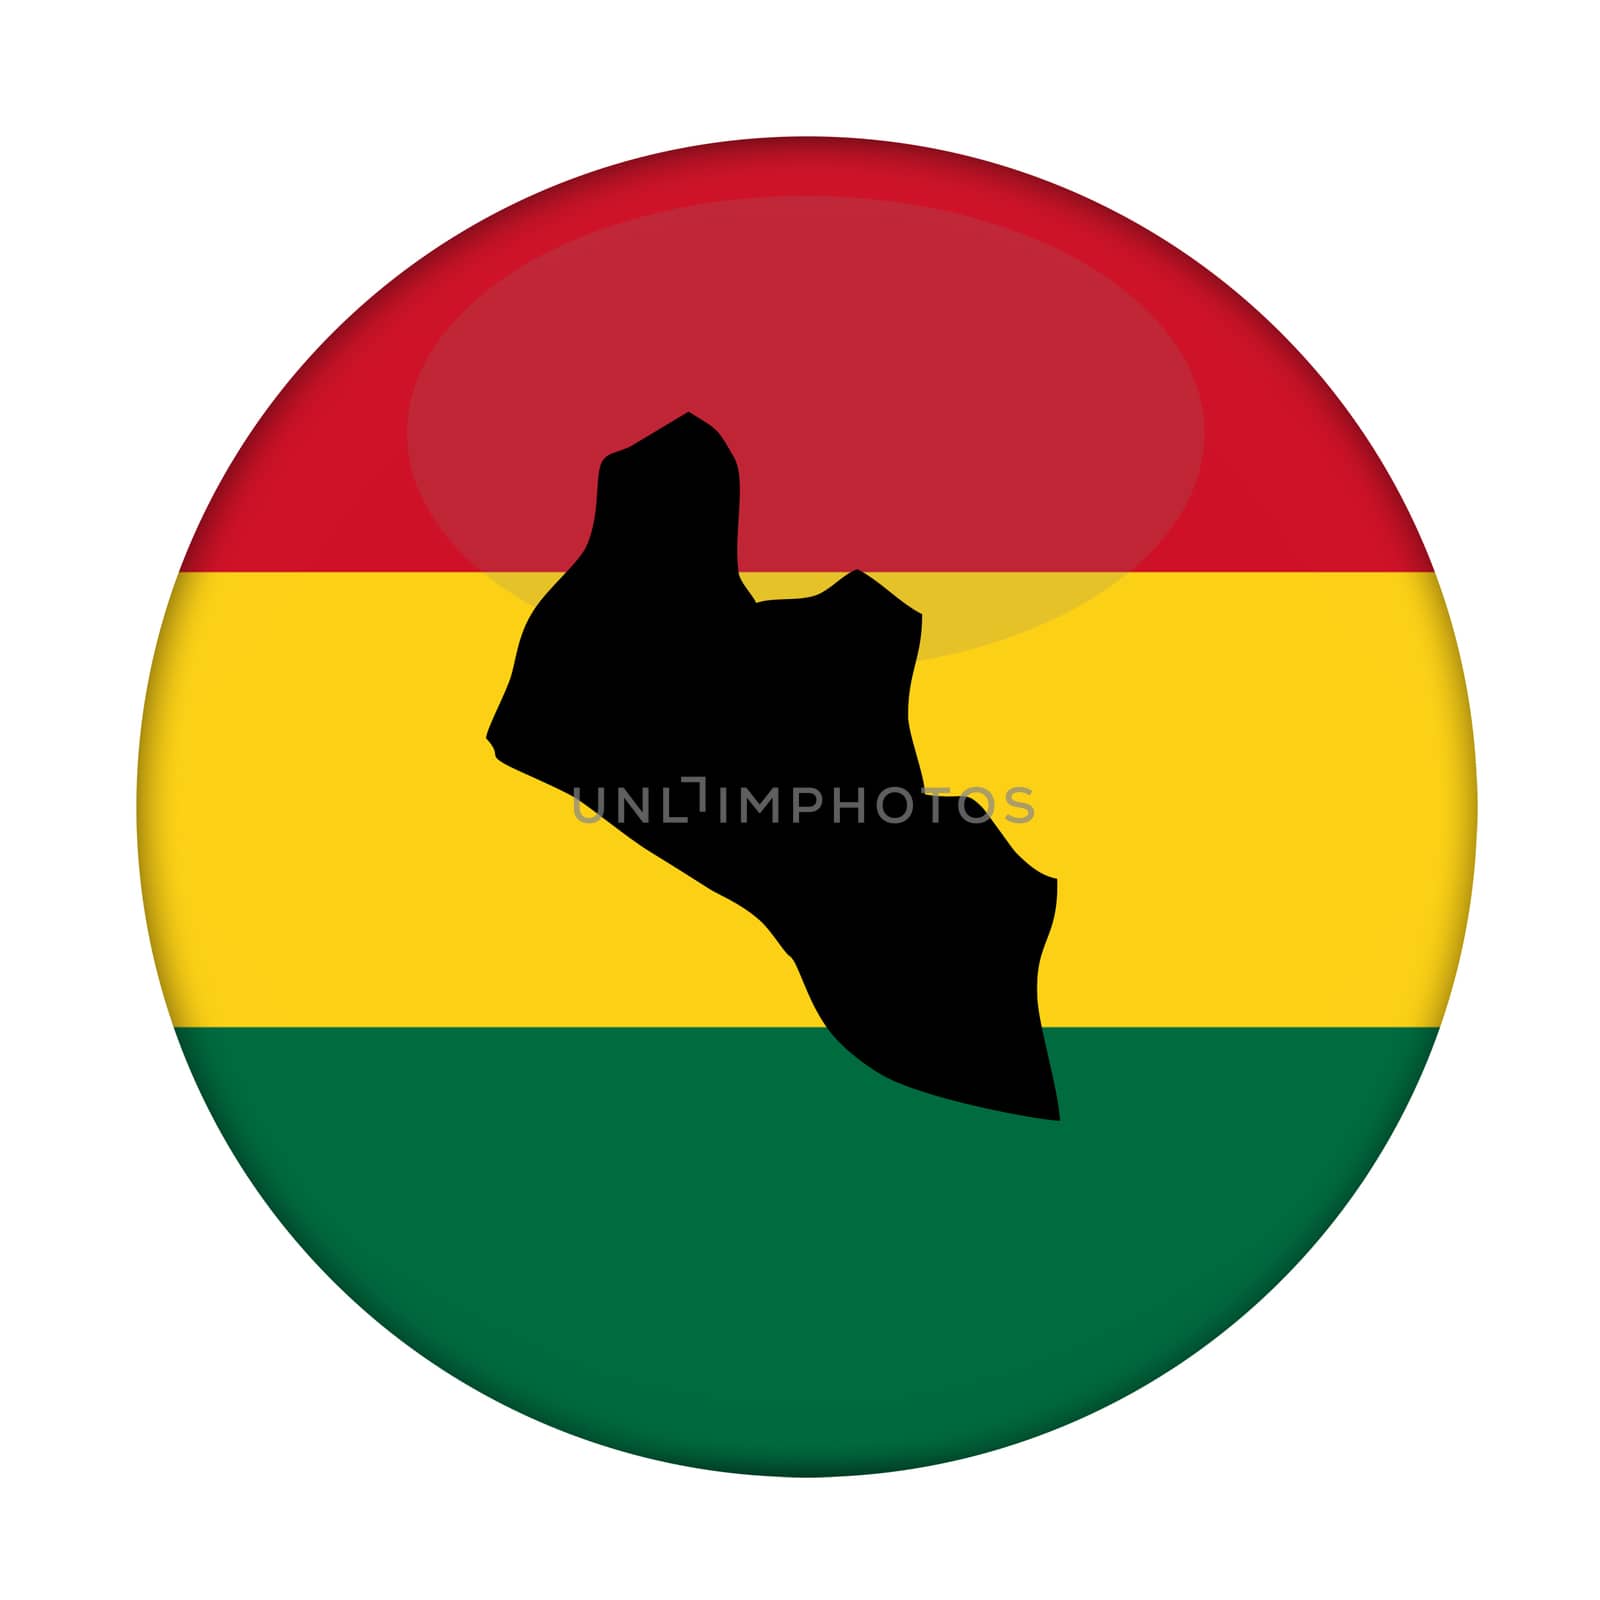 Liberia map on a Rastafarian flag button by speedfighter